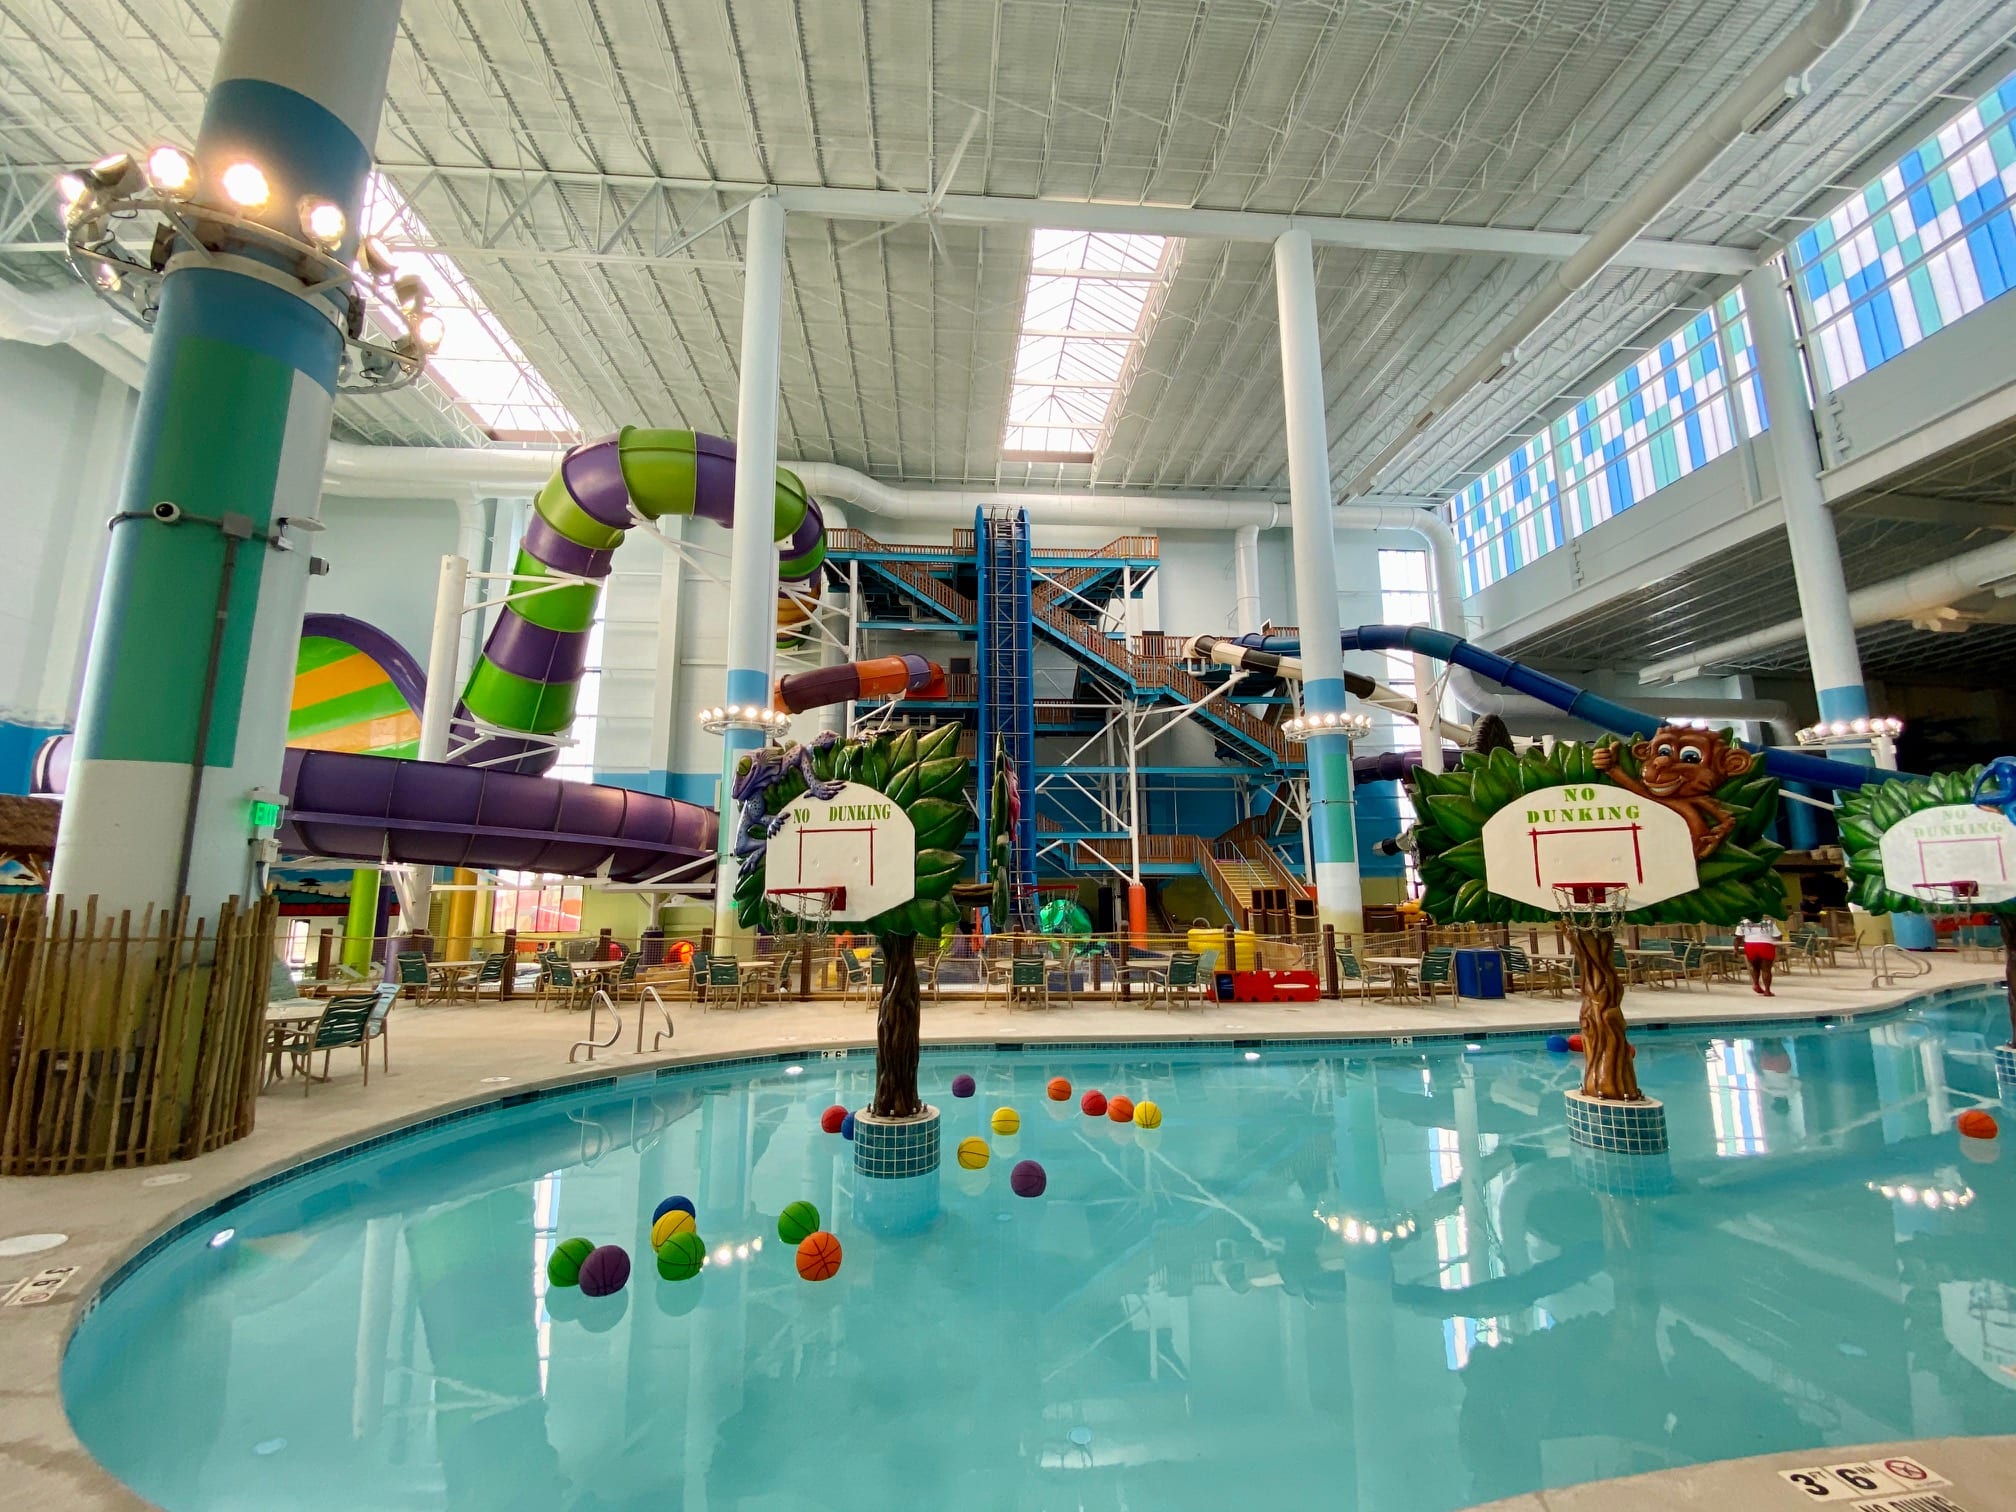 take-a-look-round-rock-is-home-to-america-s-largest-indoor-waterpark